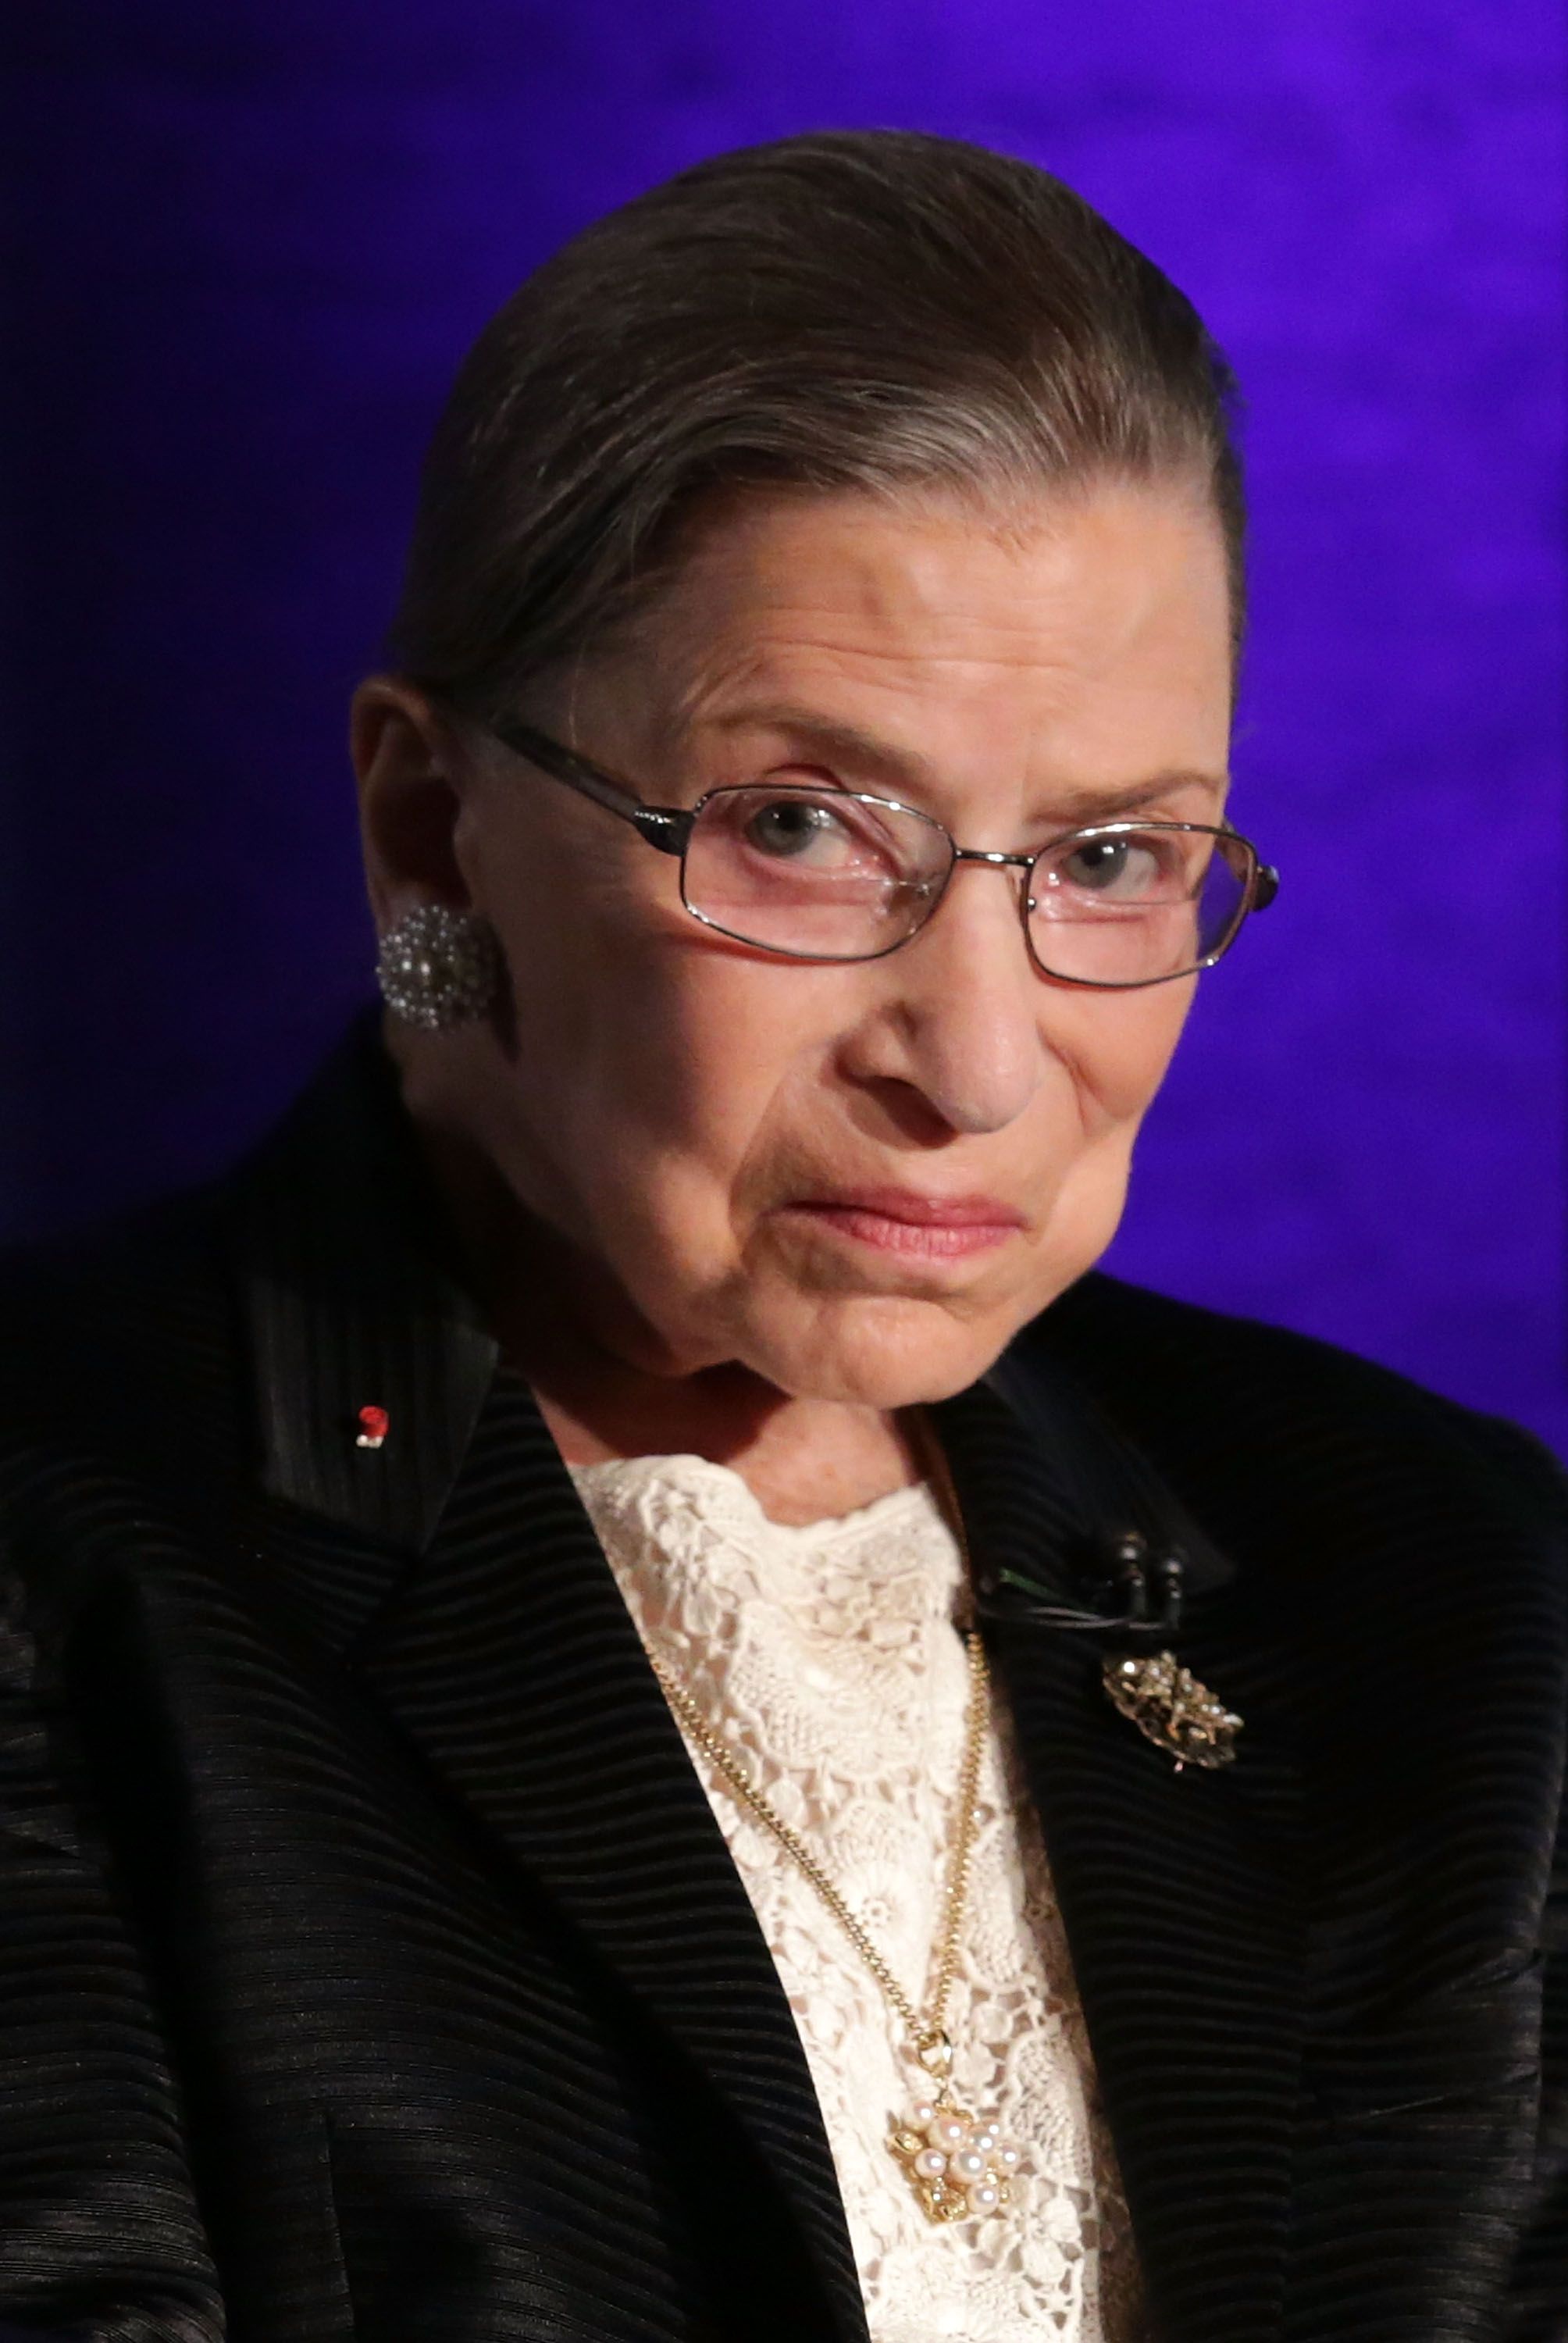 Supreme Court Justice Ruth Bader Ginsburg waits for the beginning of the taping of "The Kalb Report" April 17, 2014 at the National Press Club in Washington, DC. (Alex Wong&amp;mdash;Getty Images)